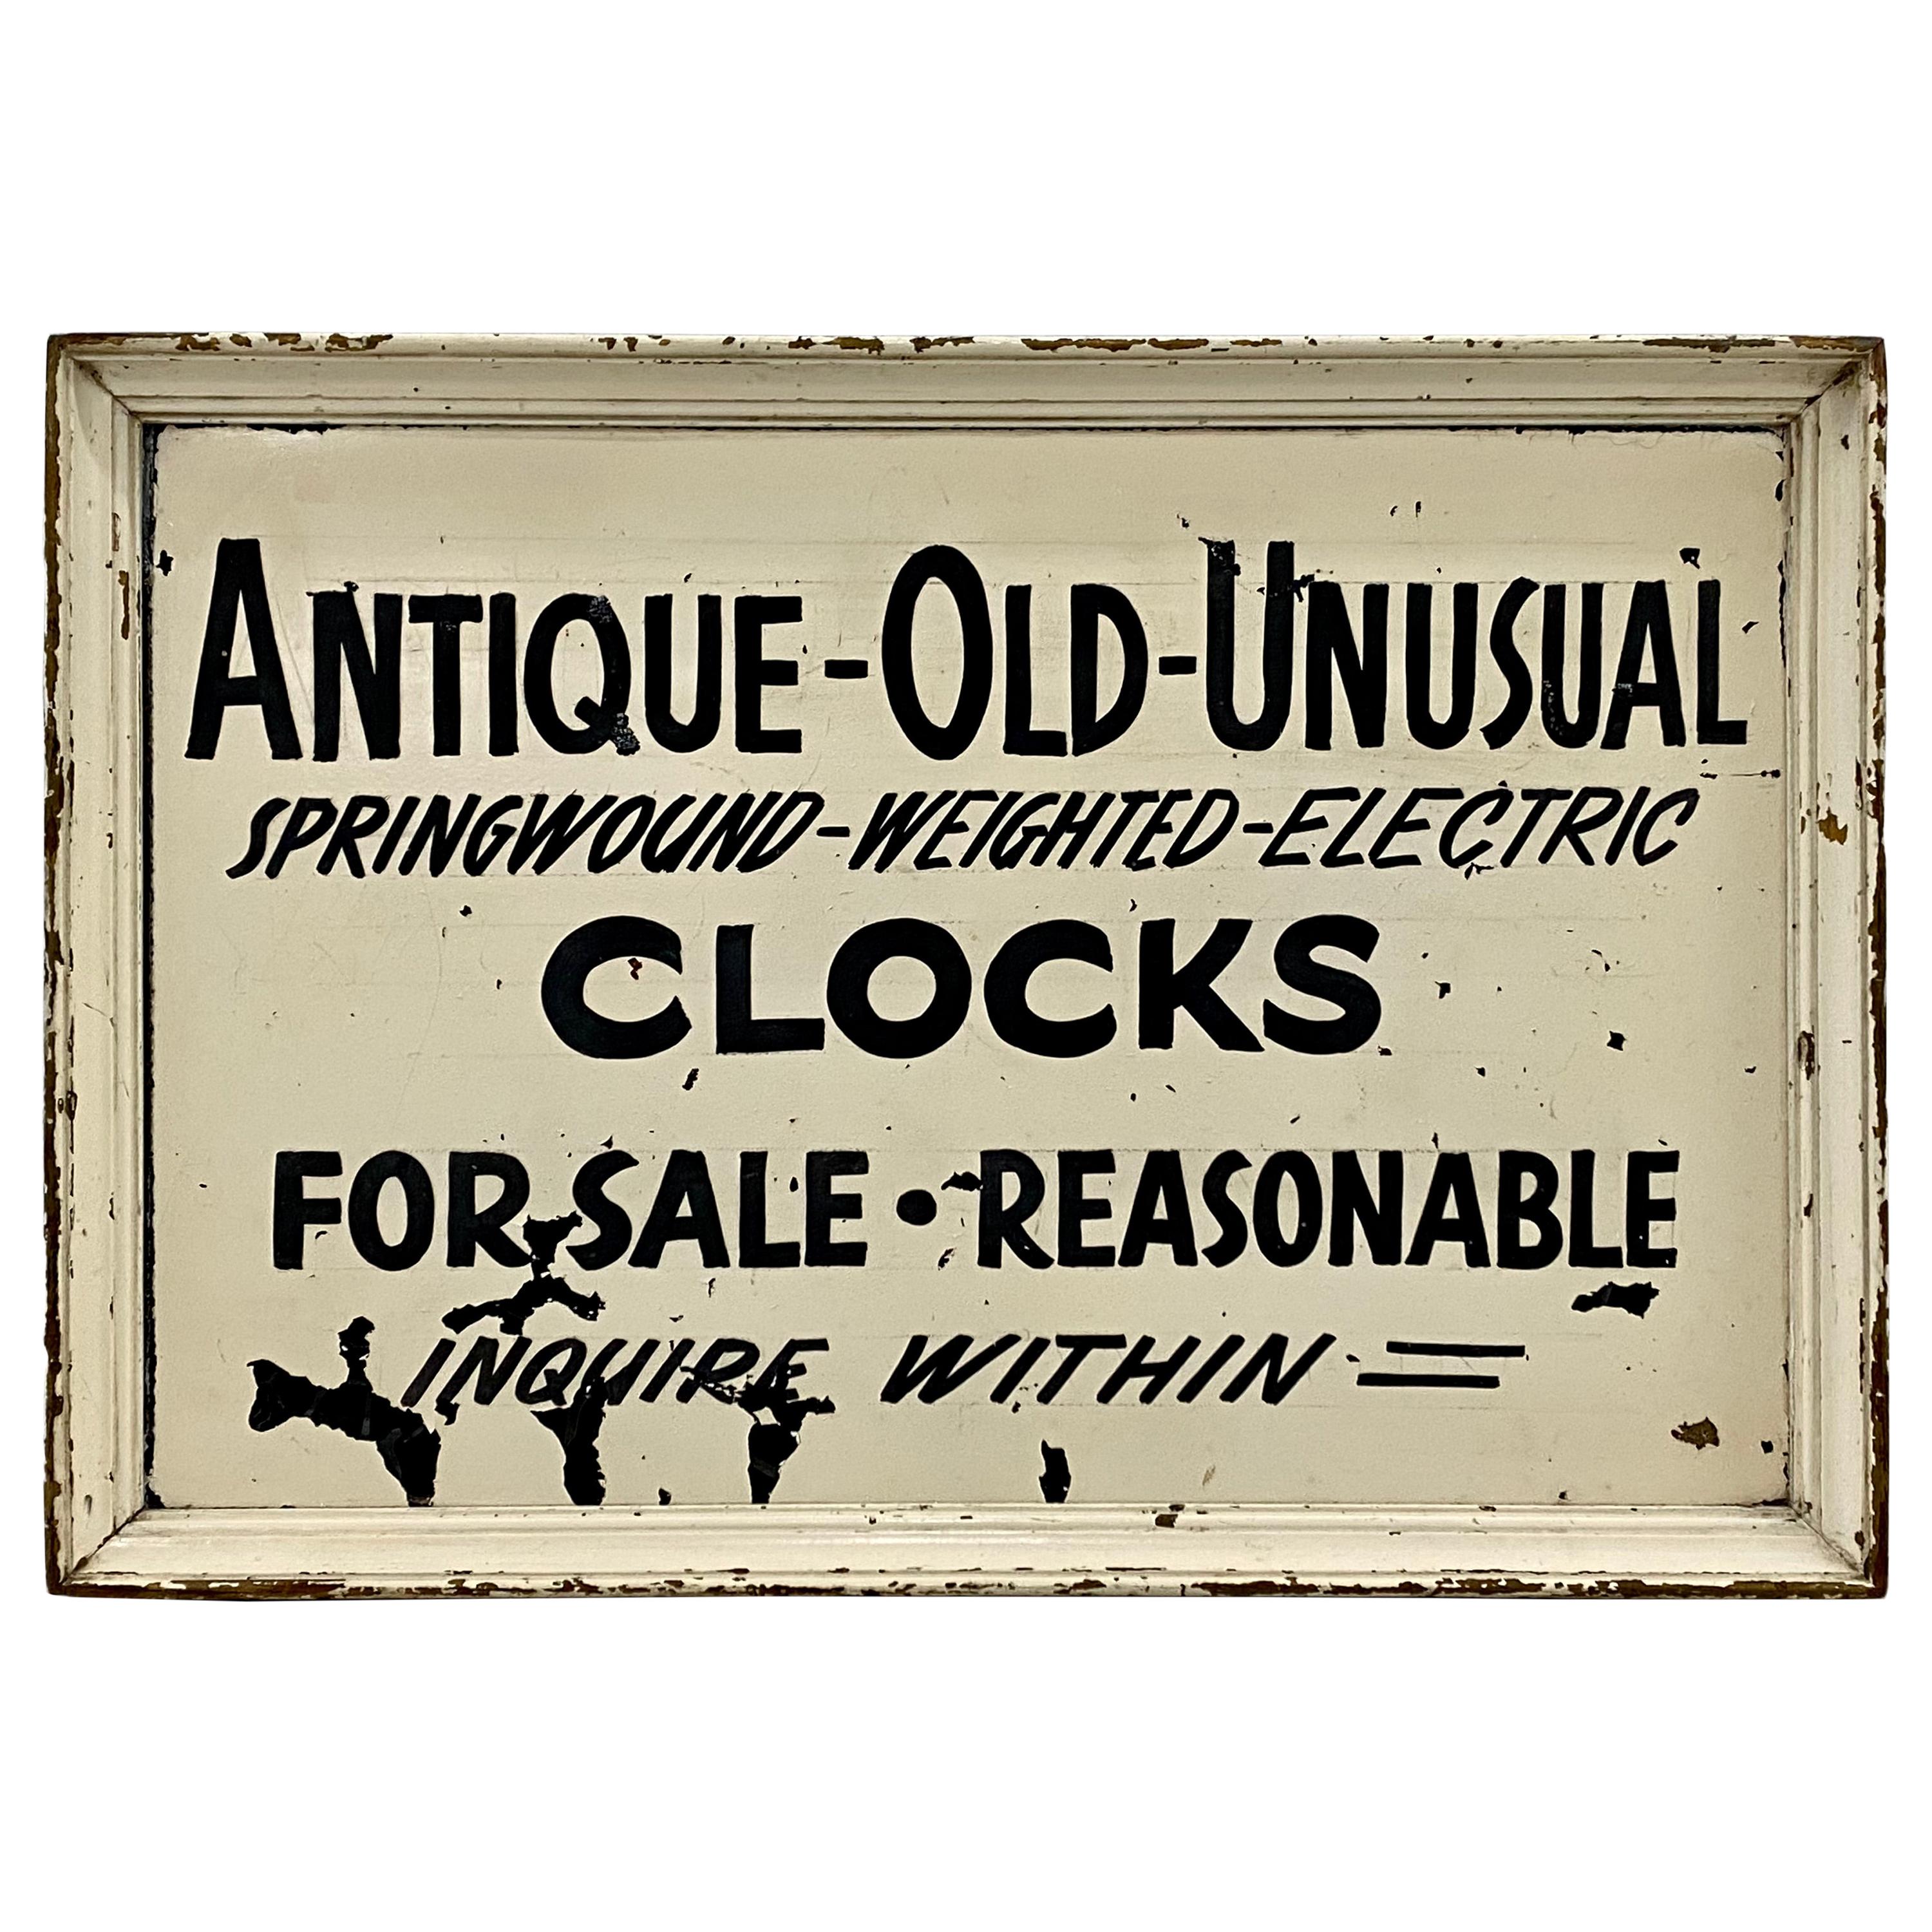 "Antique - Old - Unusual" Clocks for Sale Hand Painted Sign, c.1920 For Sale